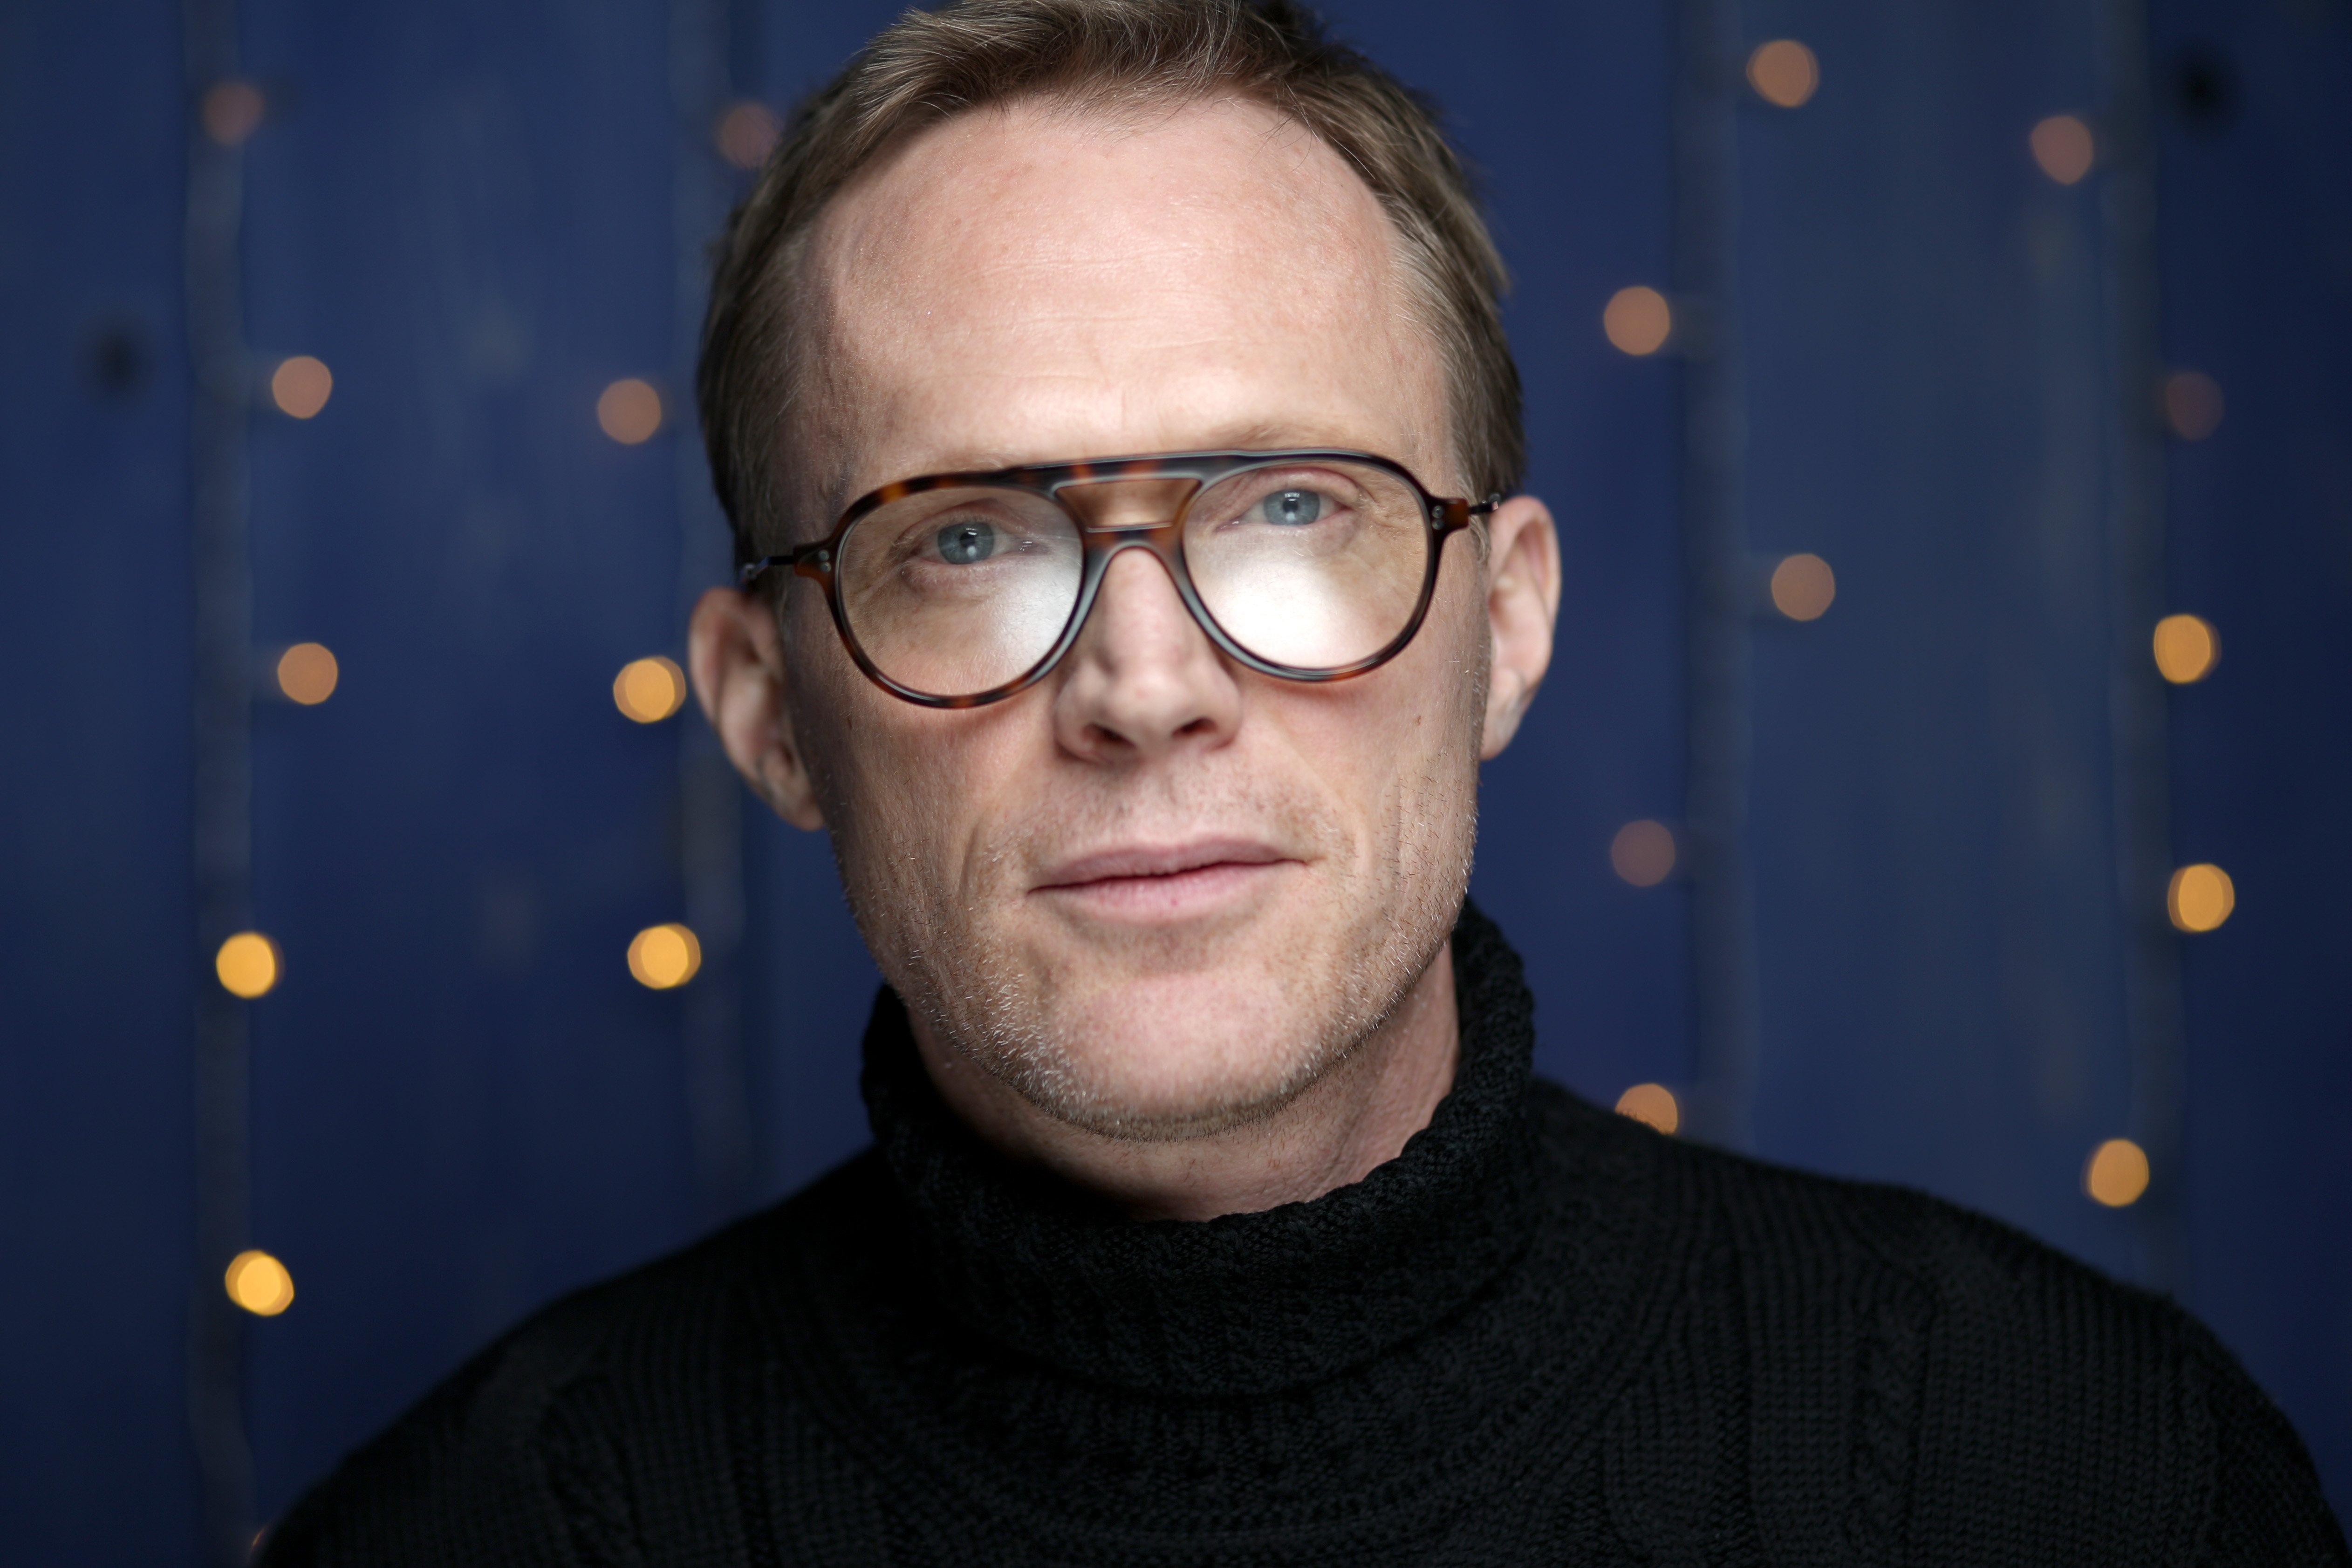 Paul Bettanys Net Worth in 2021 and His Most Successful Films